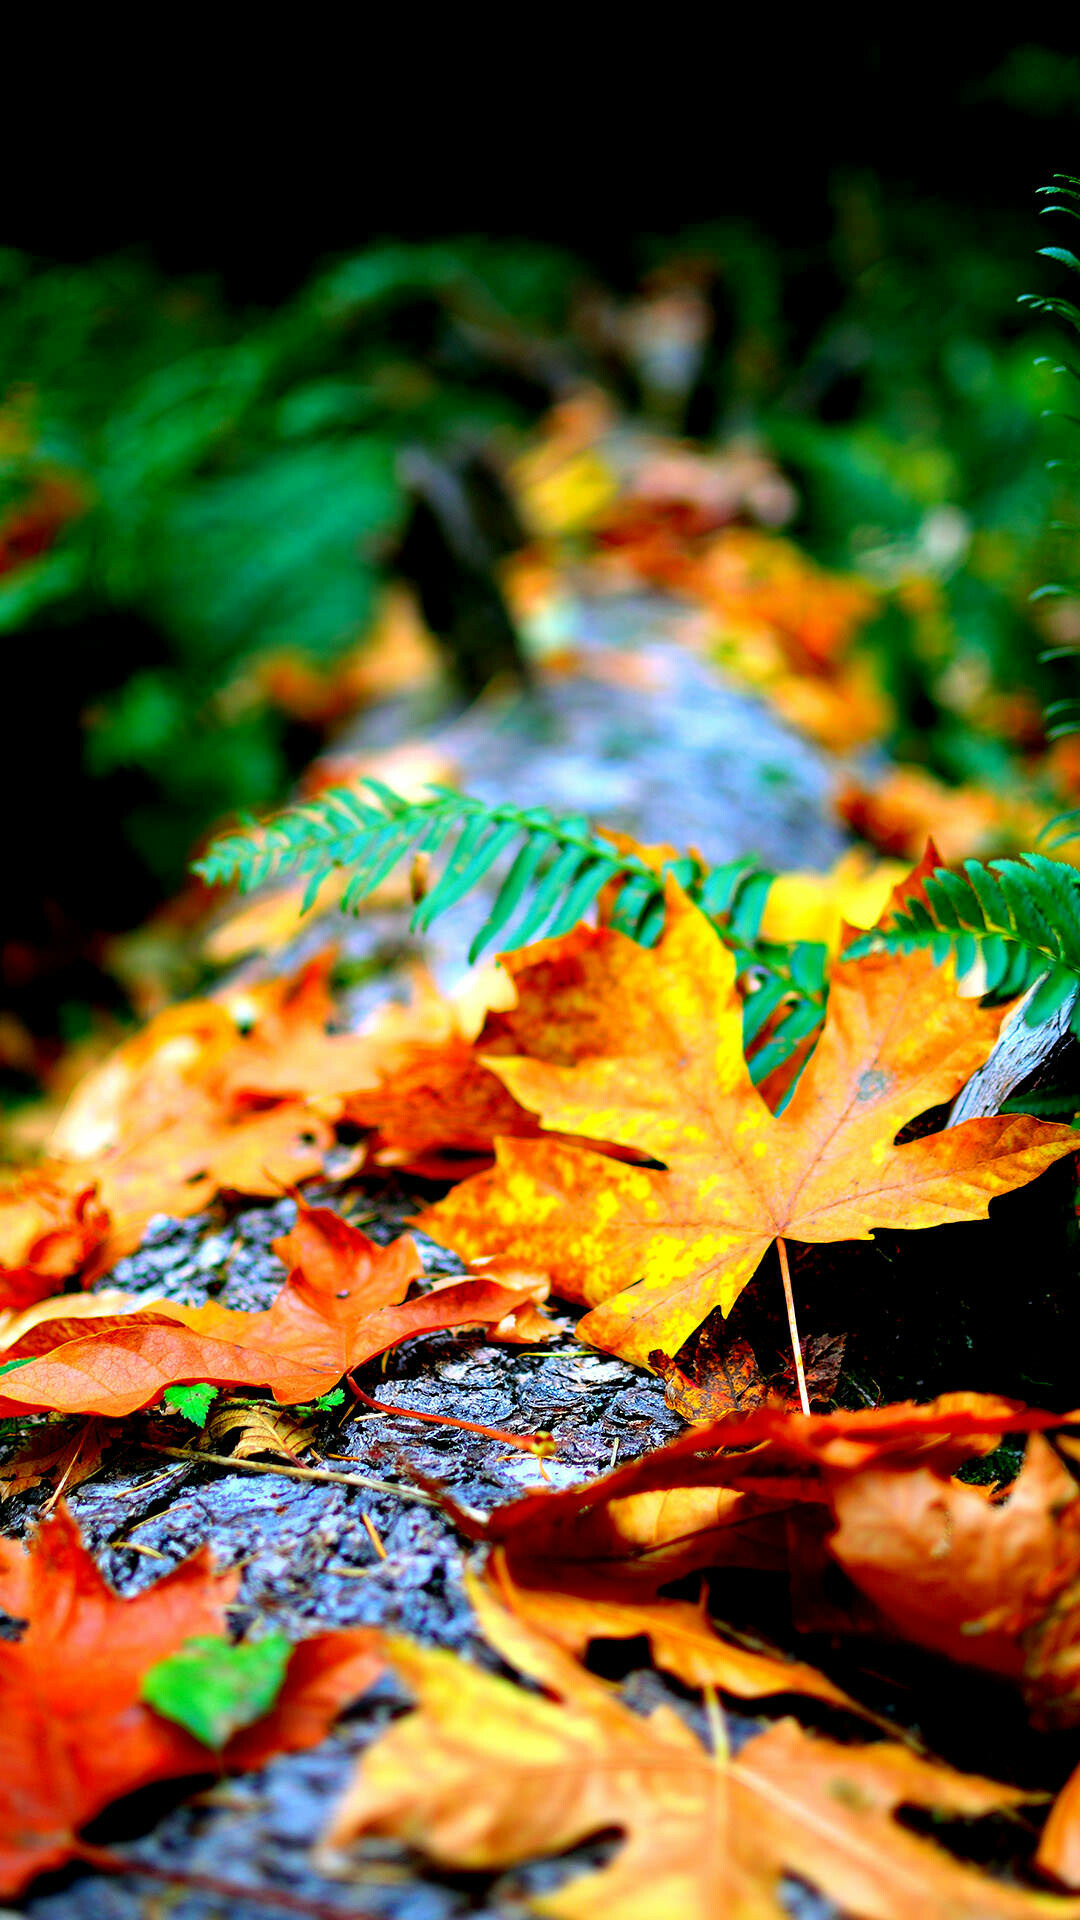 Autumn: The transition from summer to winter, Brightly colored maple leaves. 1080x1920 Full HD Wallpaper.